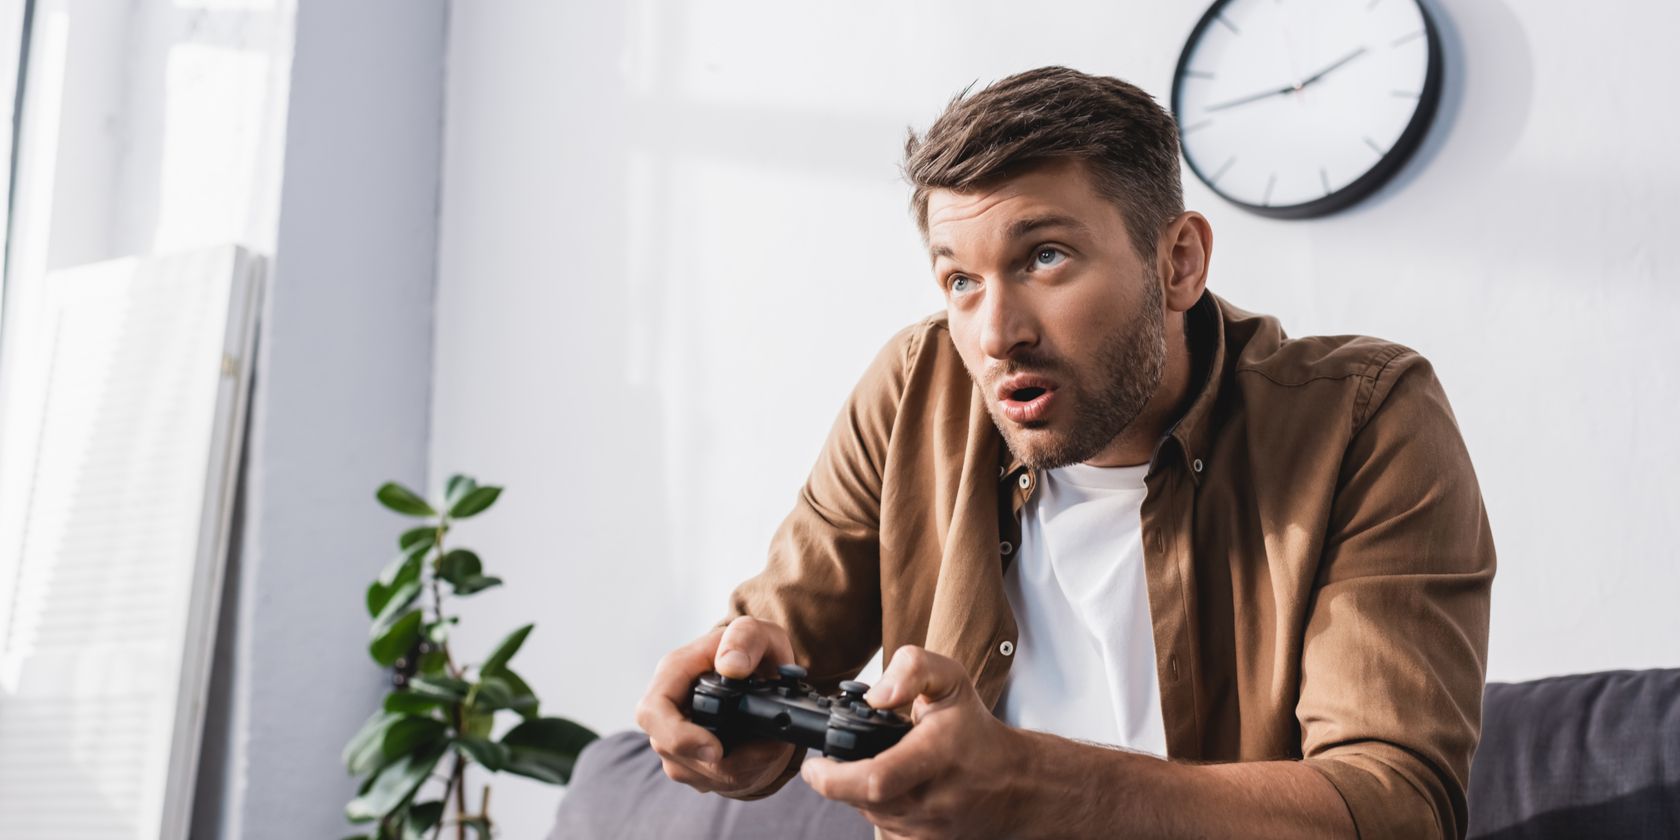 Man holding PlayStation controller, engaged in a game